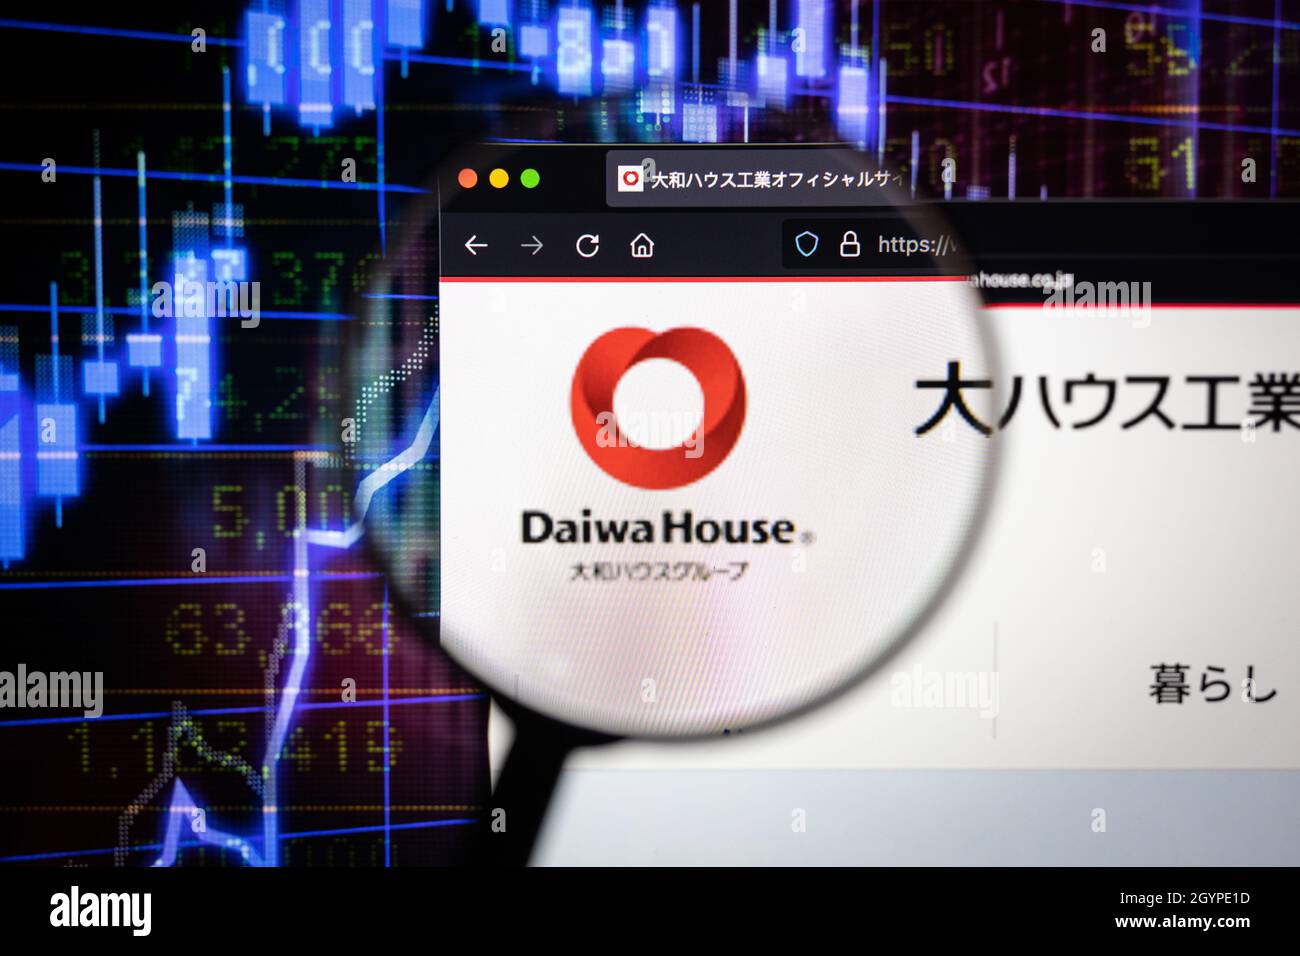 Daiwa House company logo on a website with blurry stock market graphs in the background, seen on a computer screen through a magnifying glass. Stock Photo